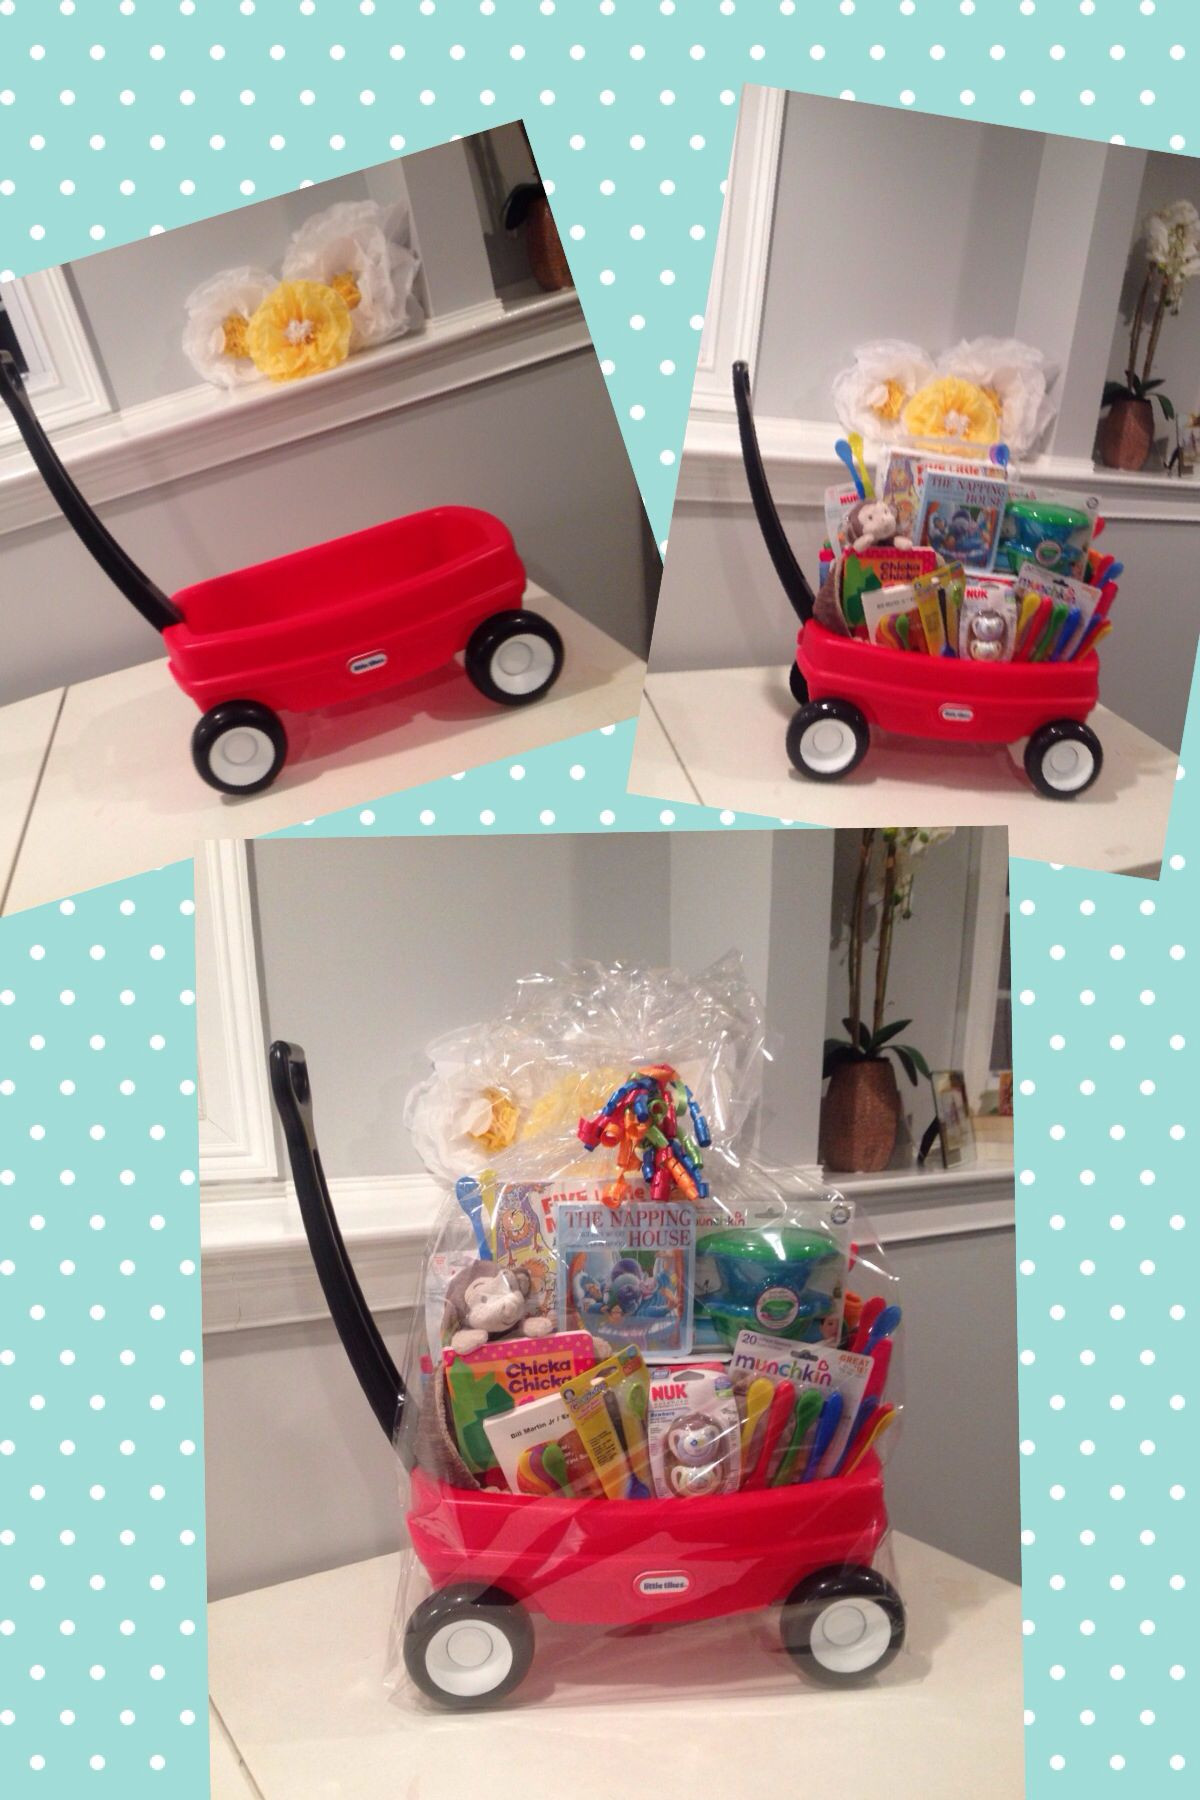 Baby Shower Gifts For Best Friend
 My latest A "Wel e Wagon" for a friend s baby